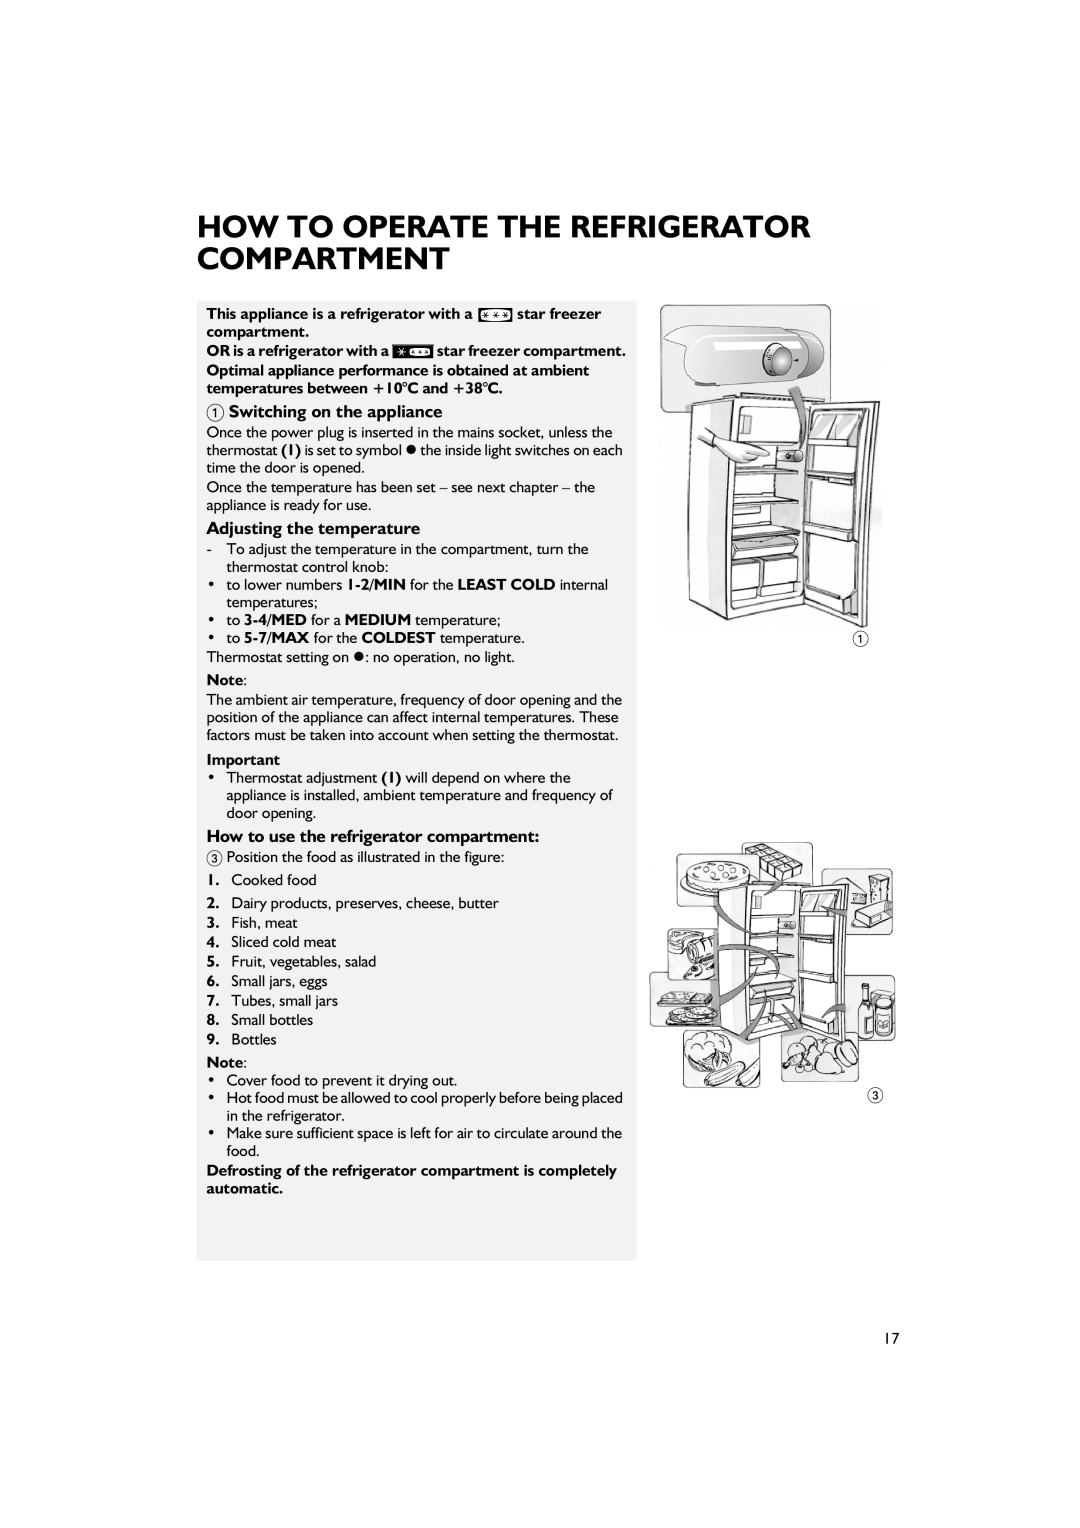 Smeg FR205A7 manual Switching on the appliance, Adjusting the temperature, How to use the refrigerator compartment 